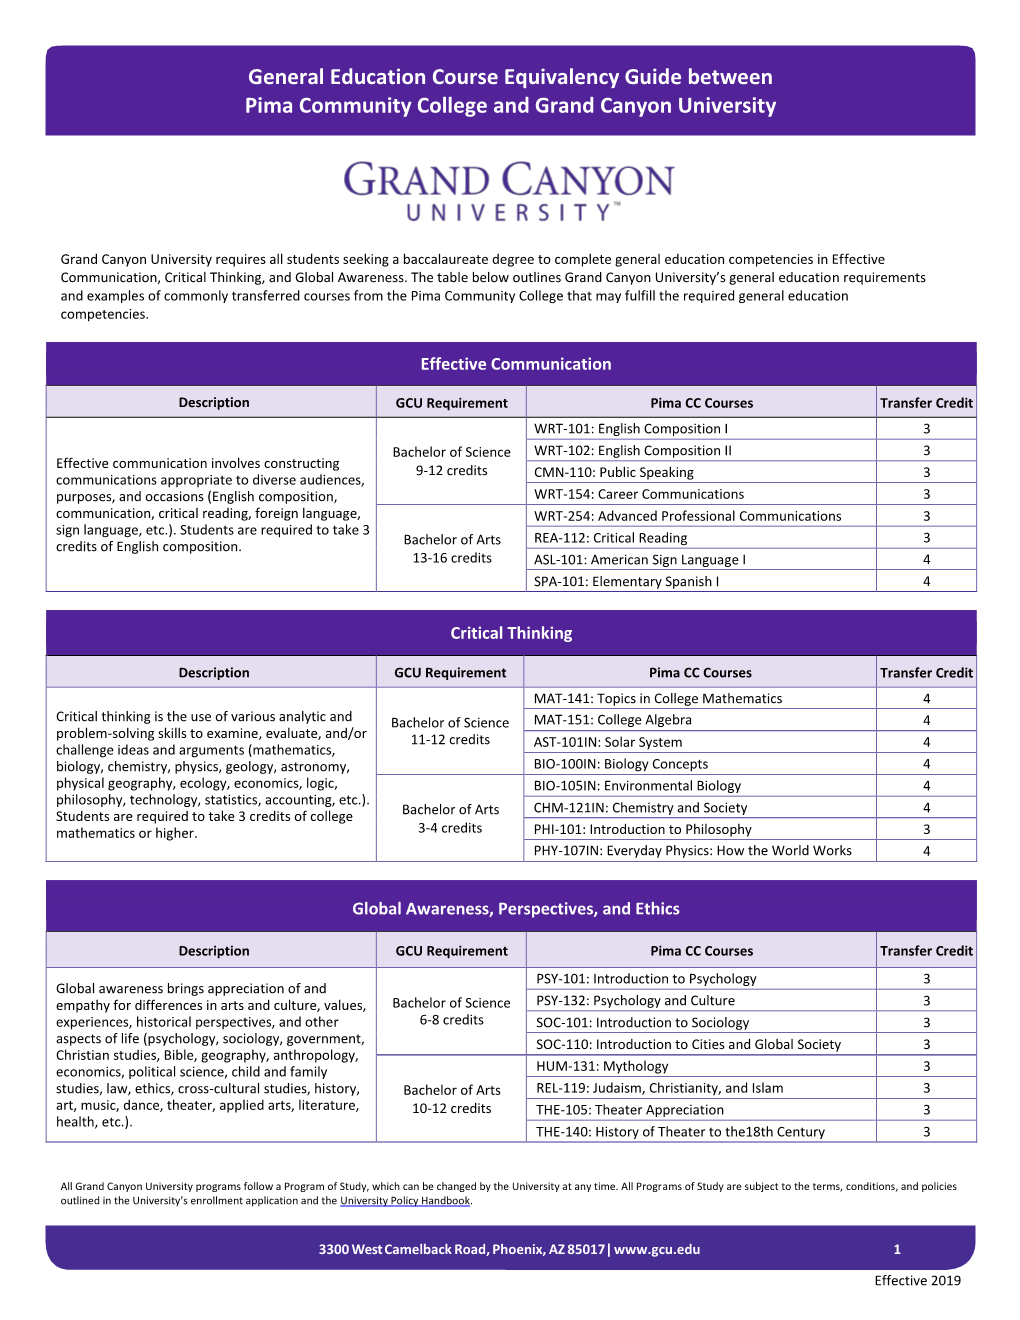 General Education Course Equivalency Guide Between Pima Community College and Grand Canyon University